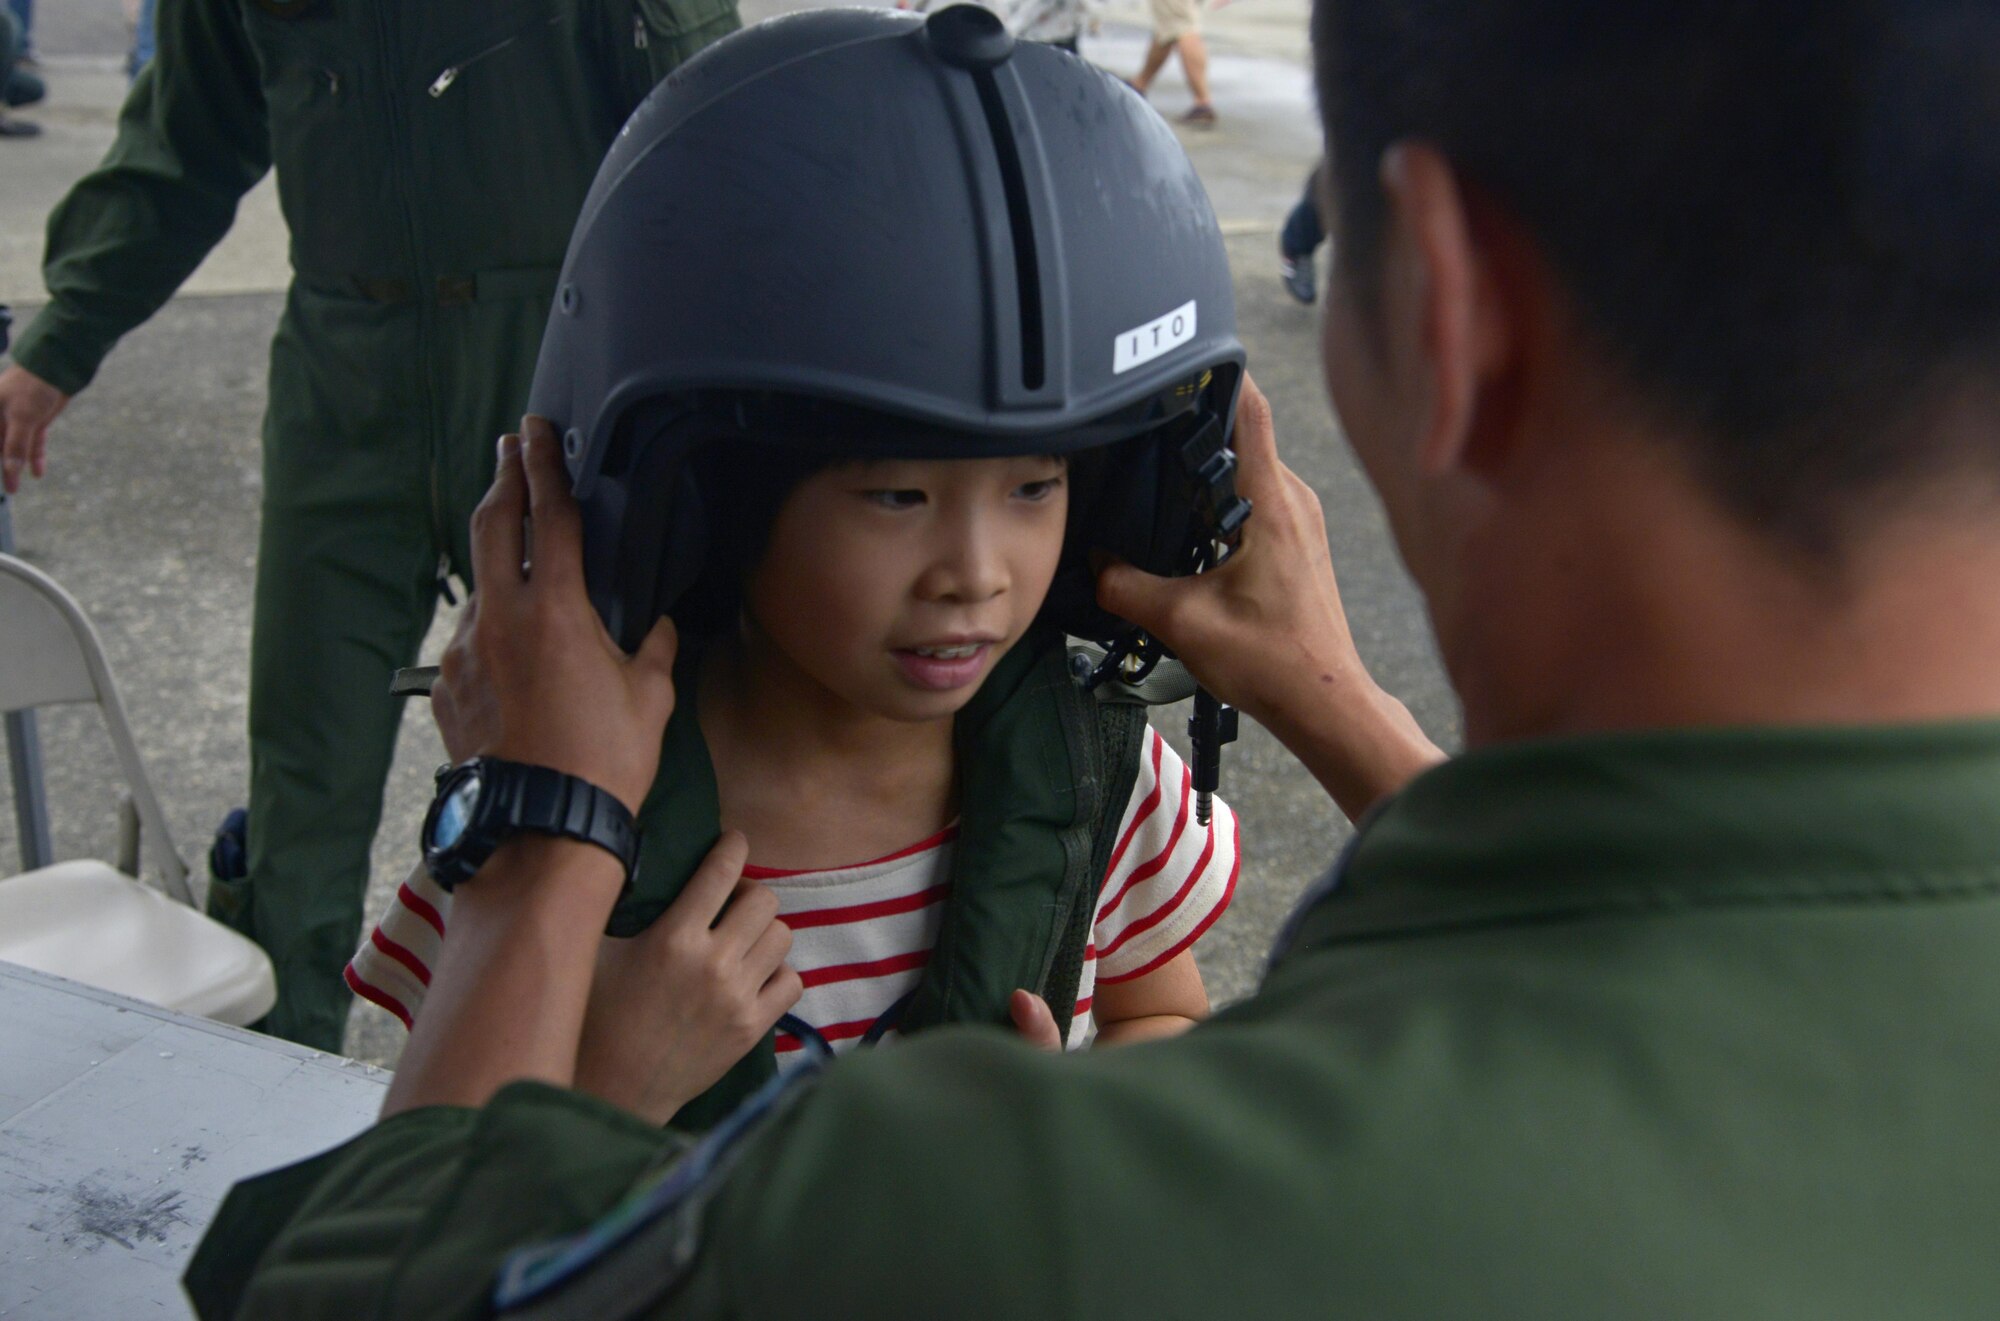 Japan Air Self-Defense Force Capt. Takeshi Itoh, 1st Tatical Airlift Wing 401st Squadron C-130 Hercules Navigator, places a helmet on a child during the Friendship Festival at Yokota Air Base, Japan, Sept. 18, 2016. The event also included live performances from bands, a strongman competition, dances, ariel demonstrations, static displays and military working dog demonstrations. (U.S. Air Force photo by Senior Airman David Owsianka/Released)